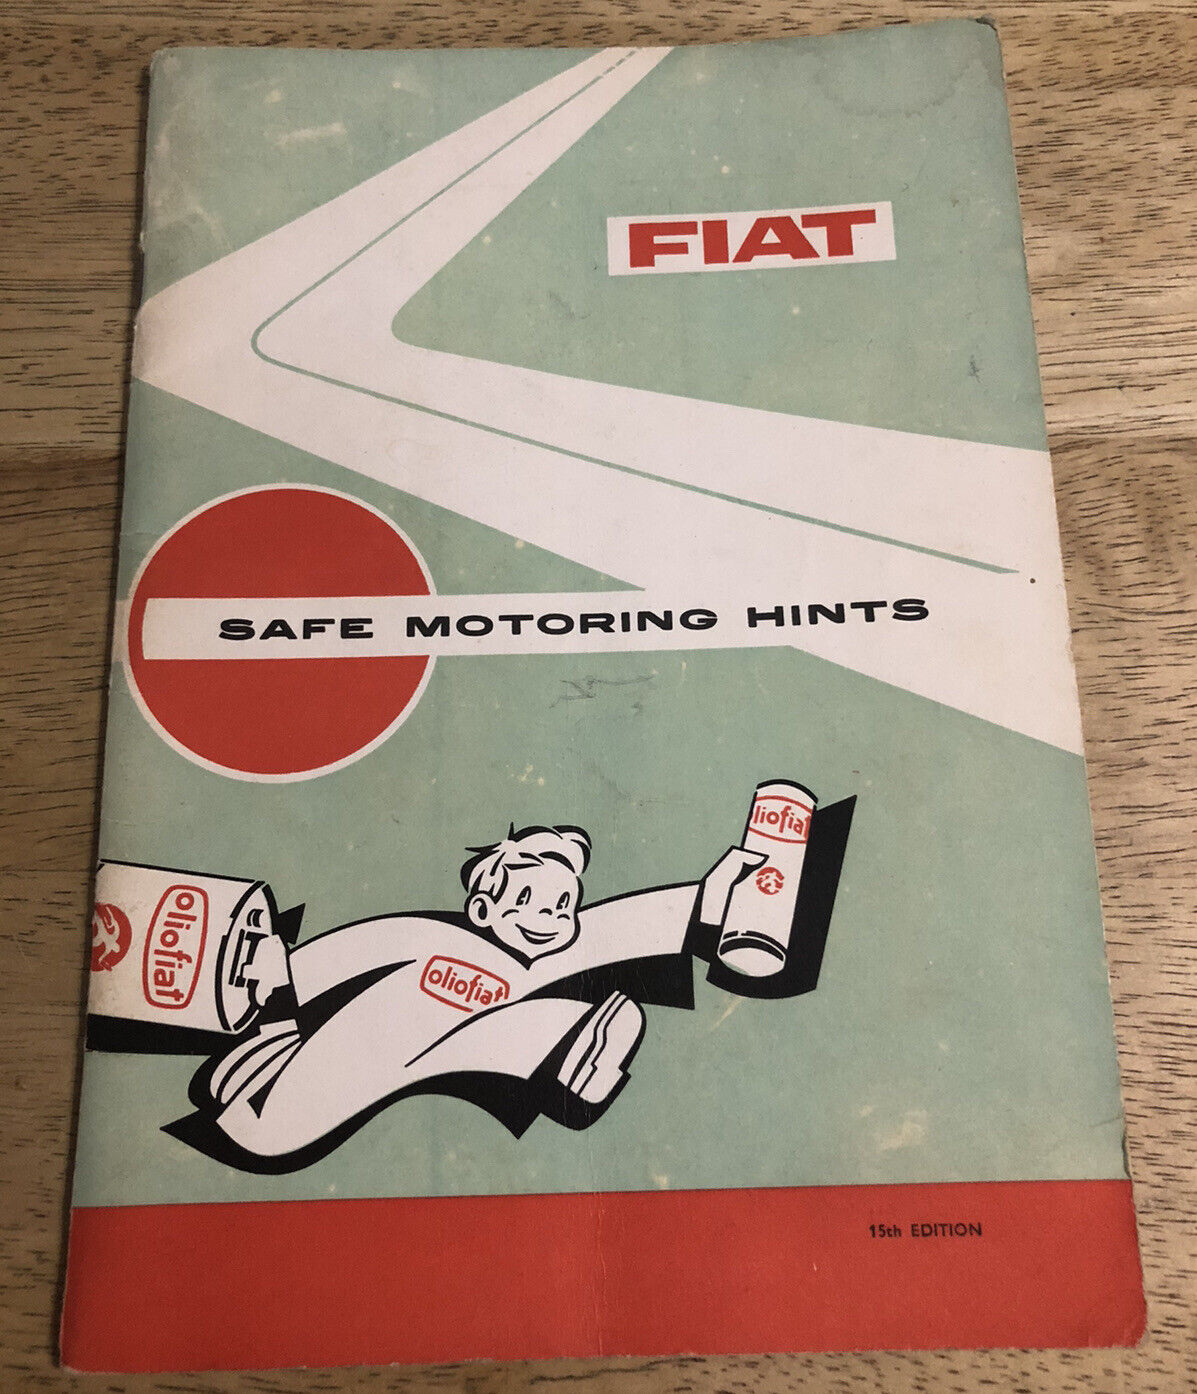 Vintage 1966 FIAT Safe Motoring Hints - 15th Edition - 48 Page Softcover Booklet